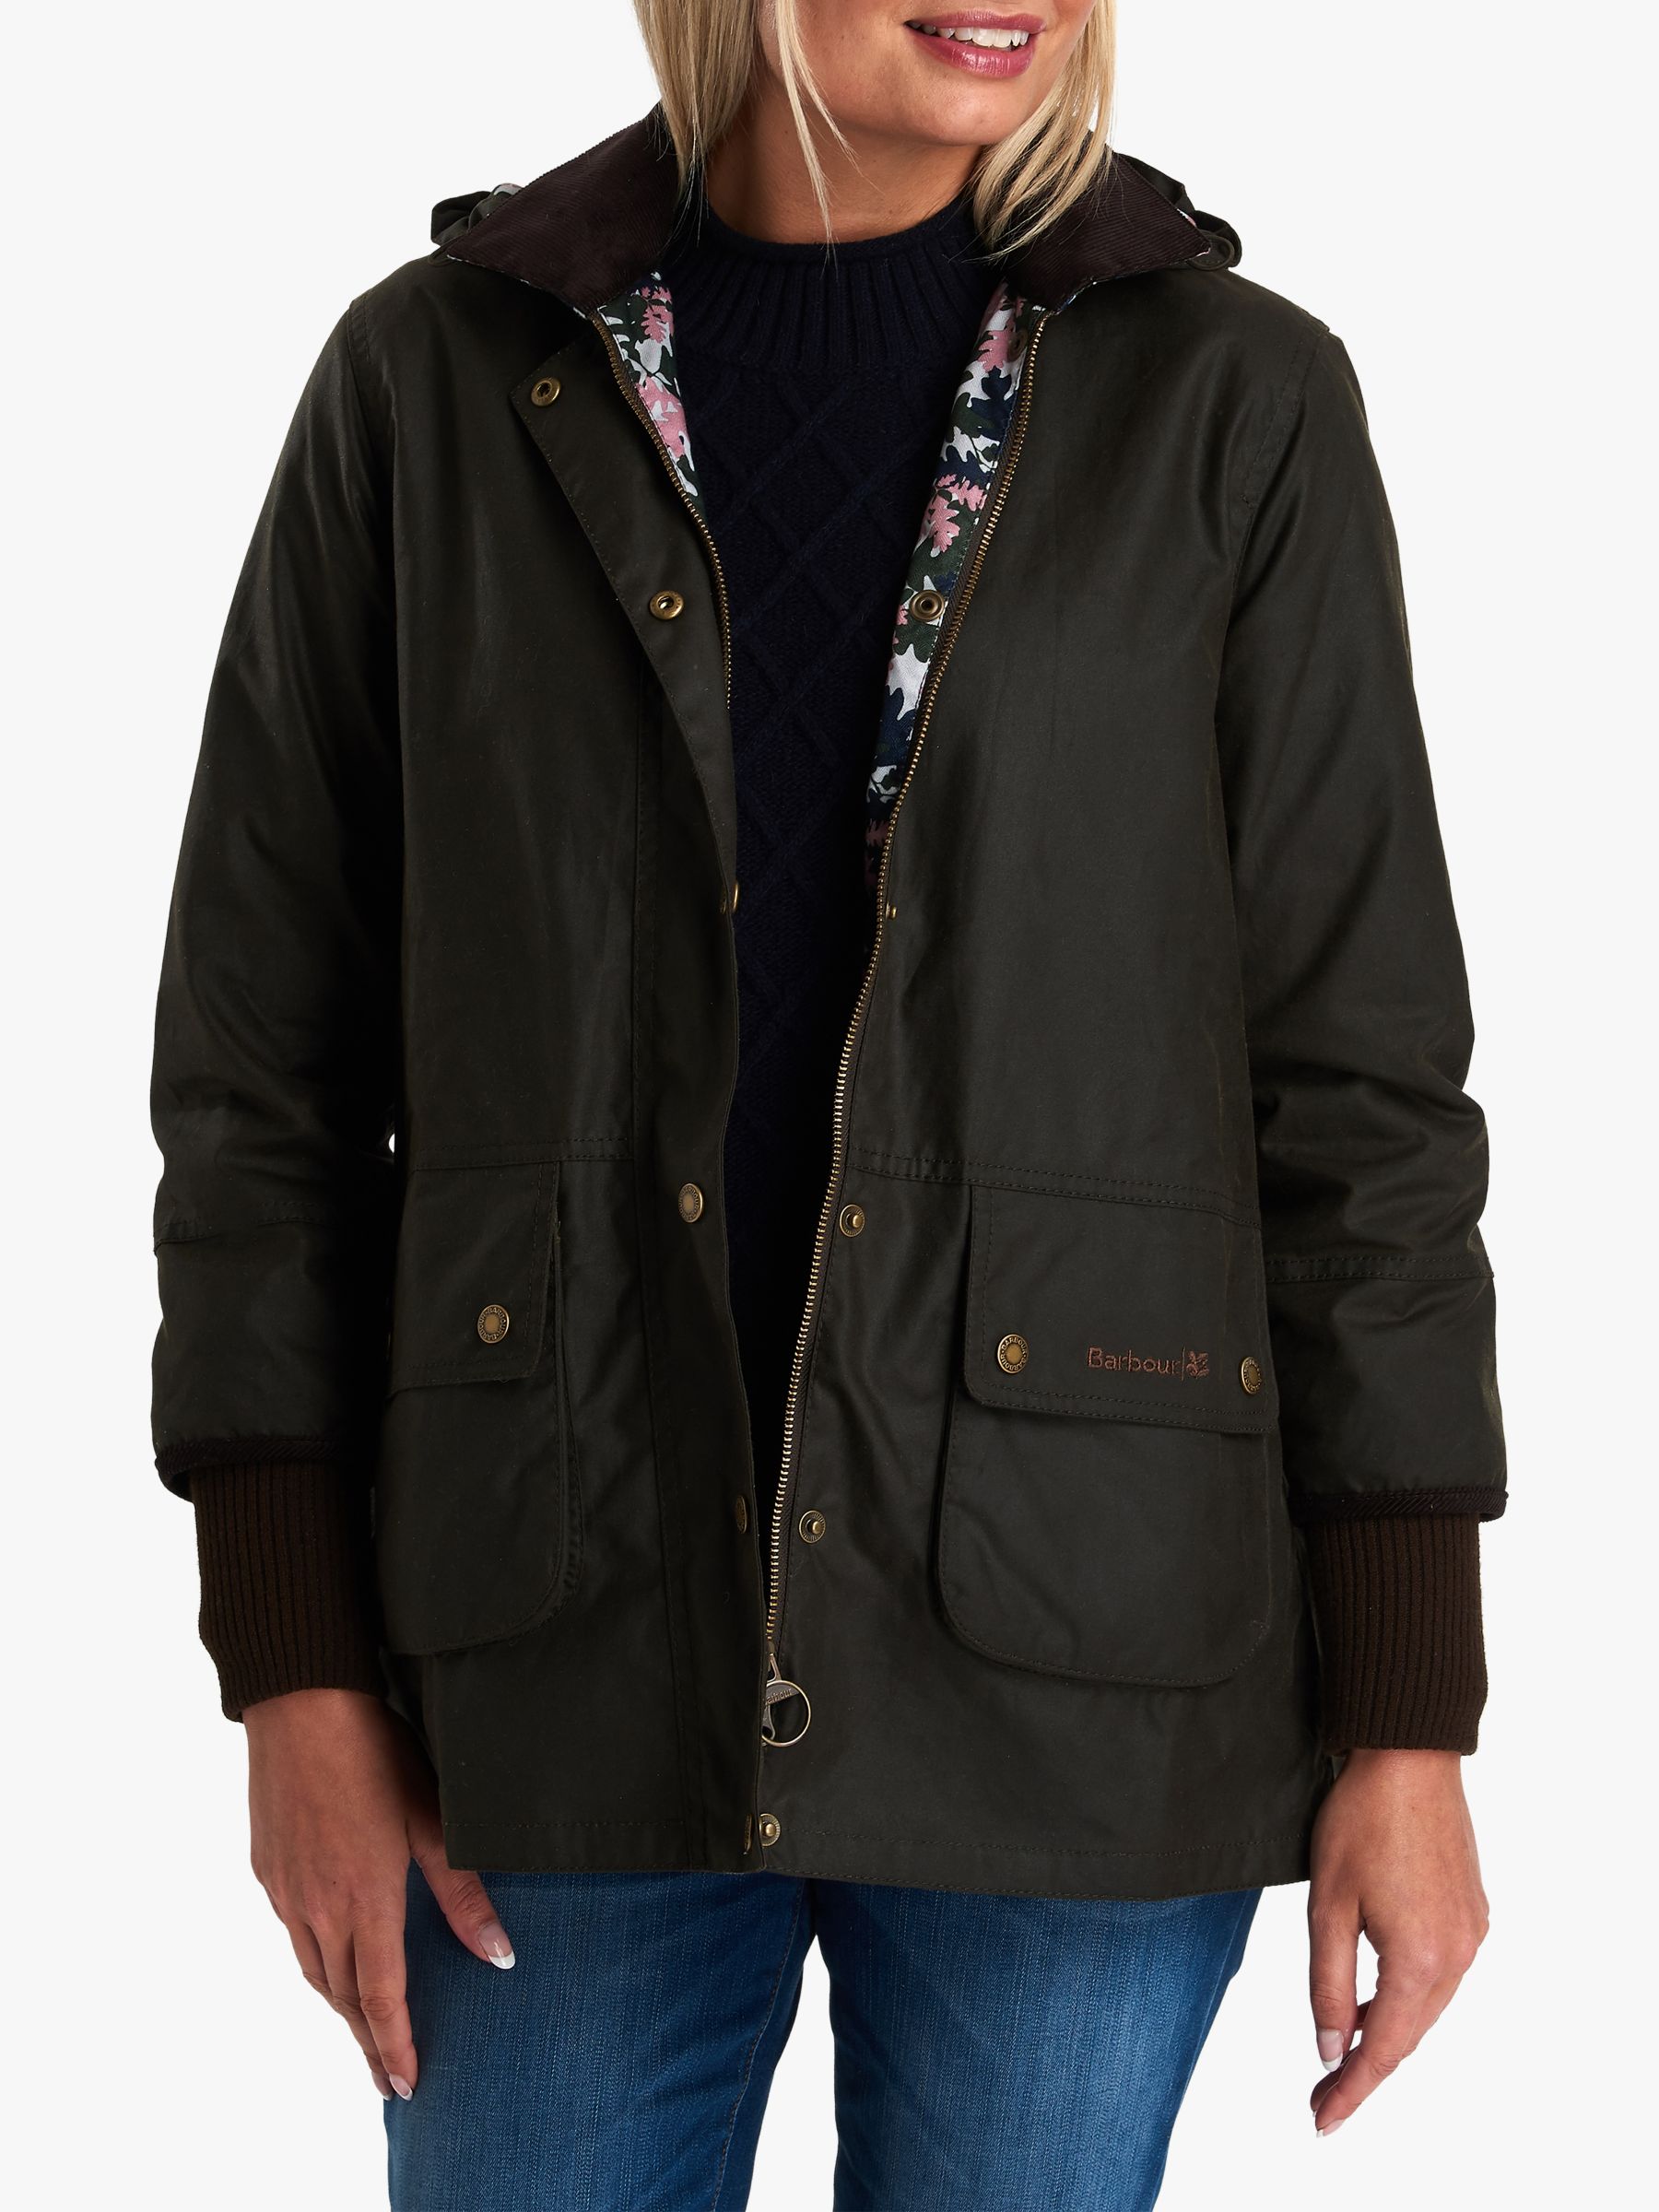 Barbour National Trust Dales Waxed Cotton Jacket, Olive